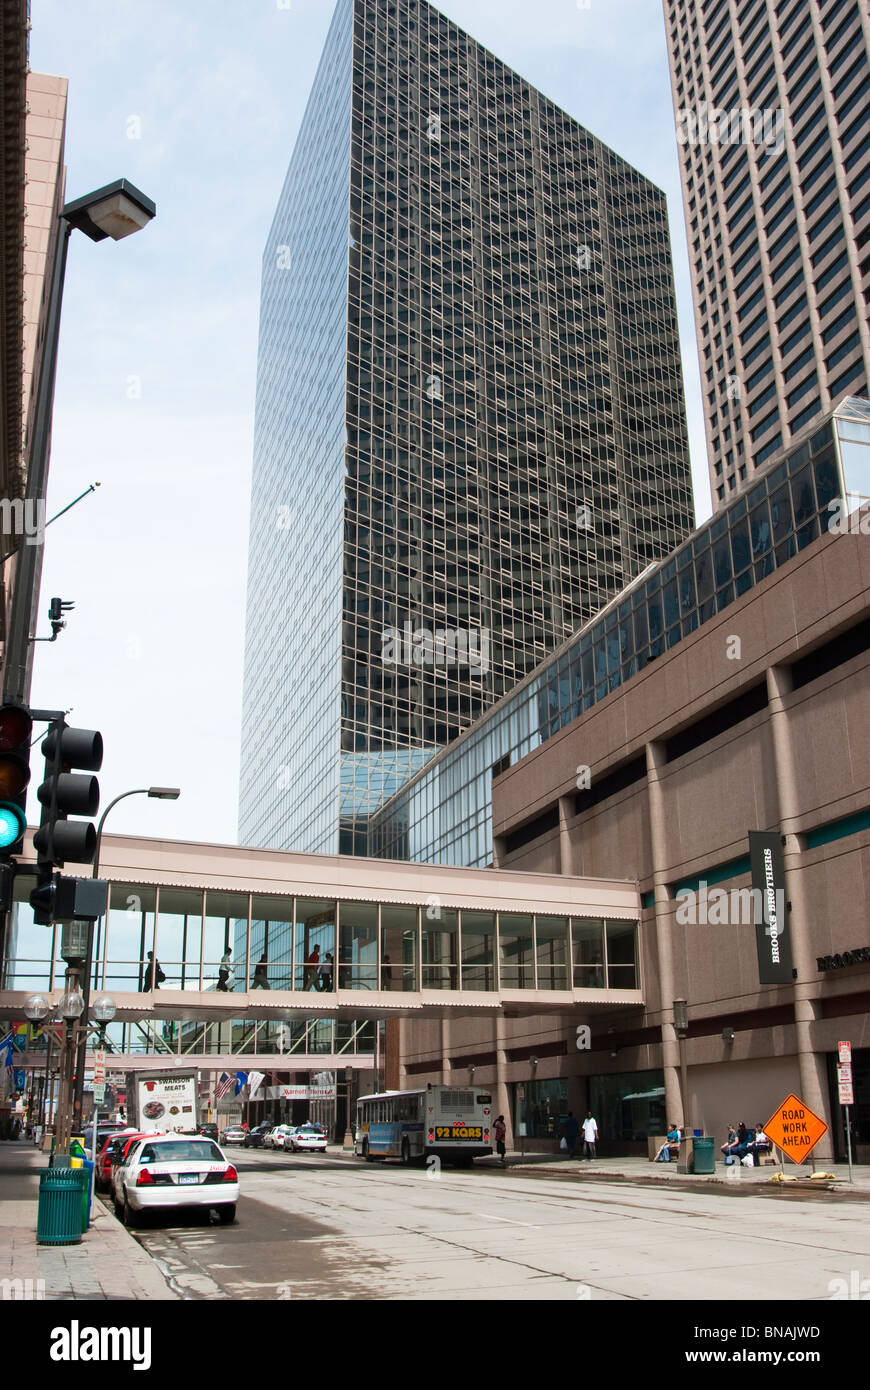 A skyway is elevated above the street traffic in Minneapolis, Minnesota. Stock Photo